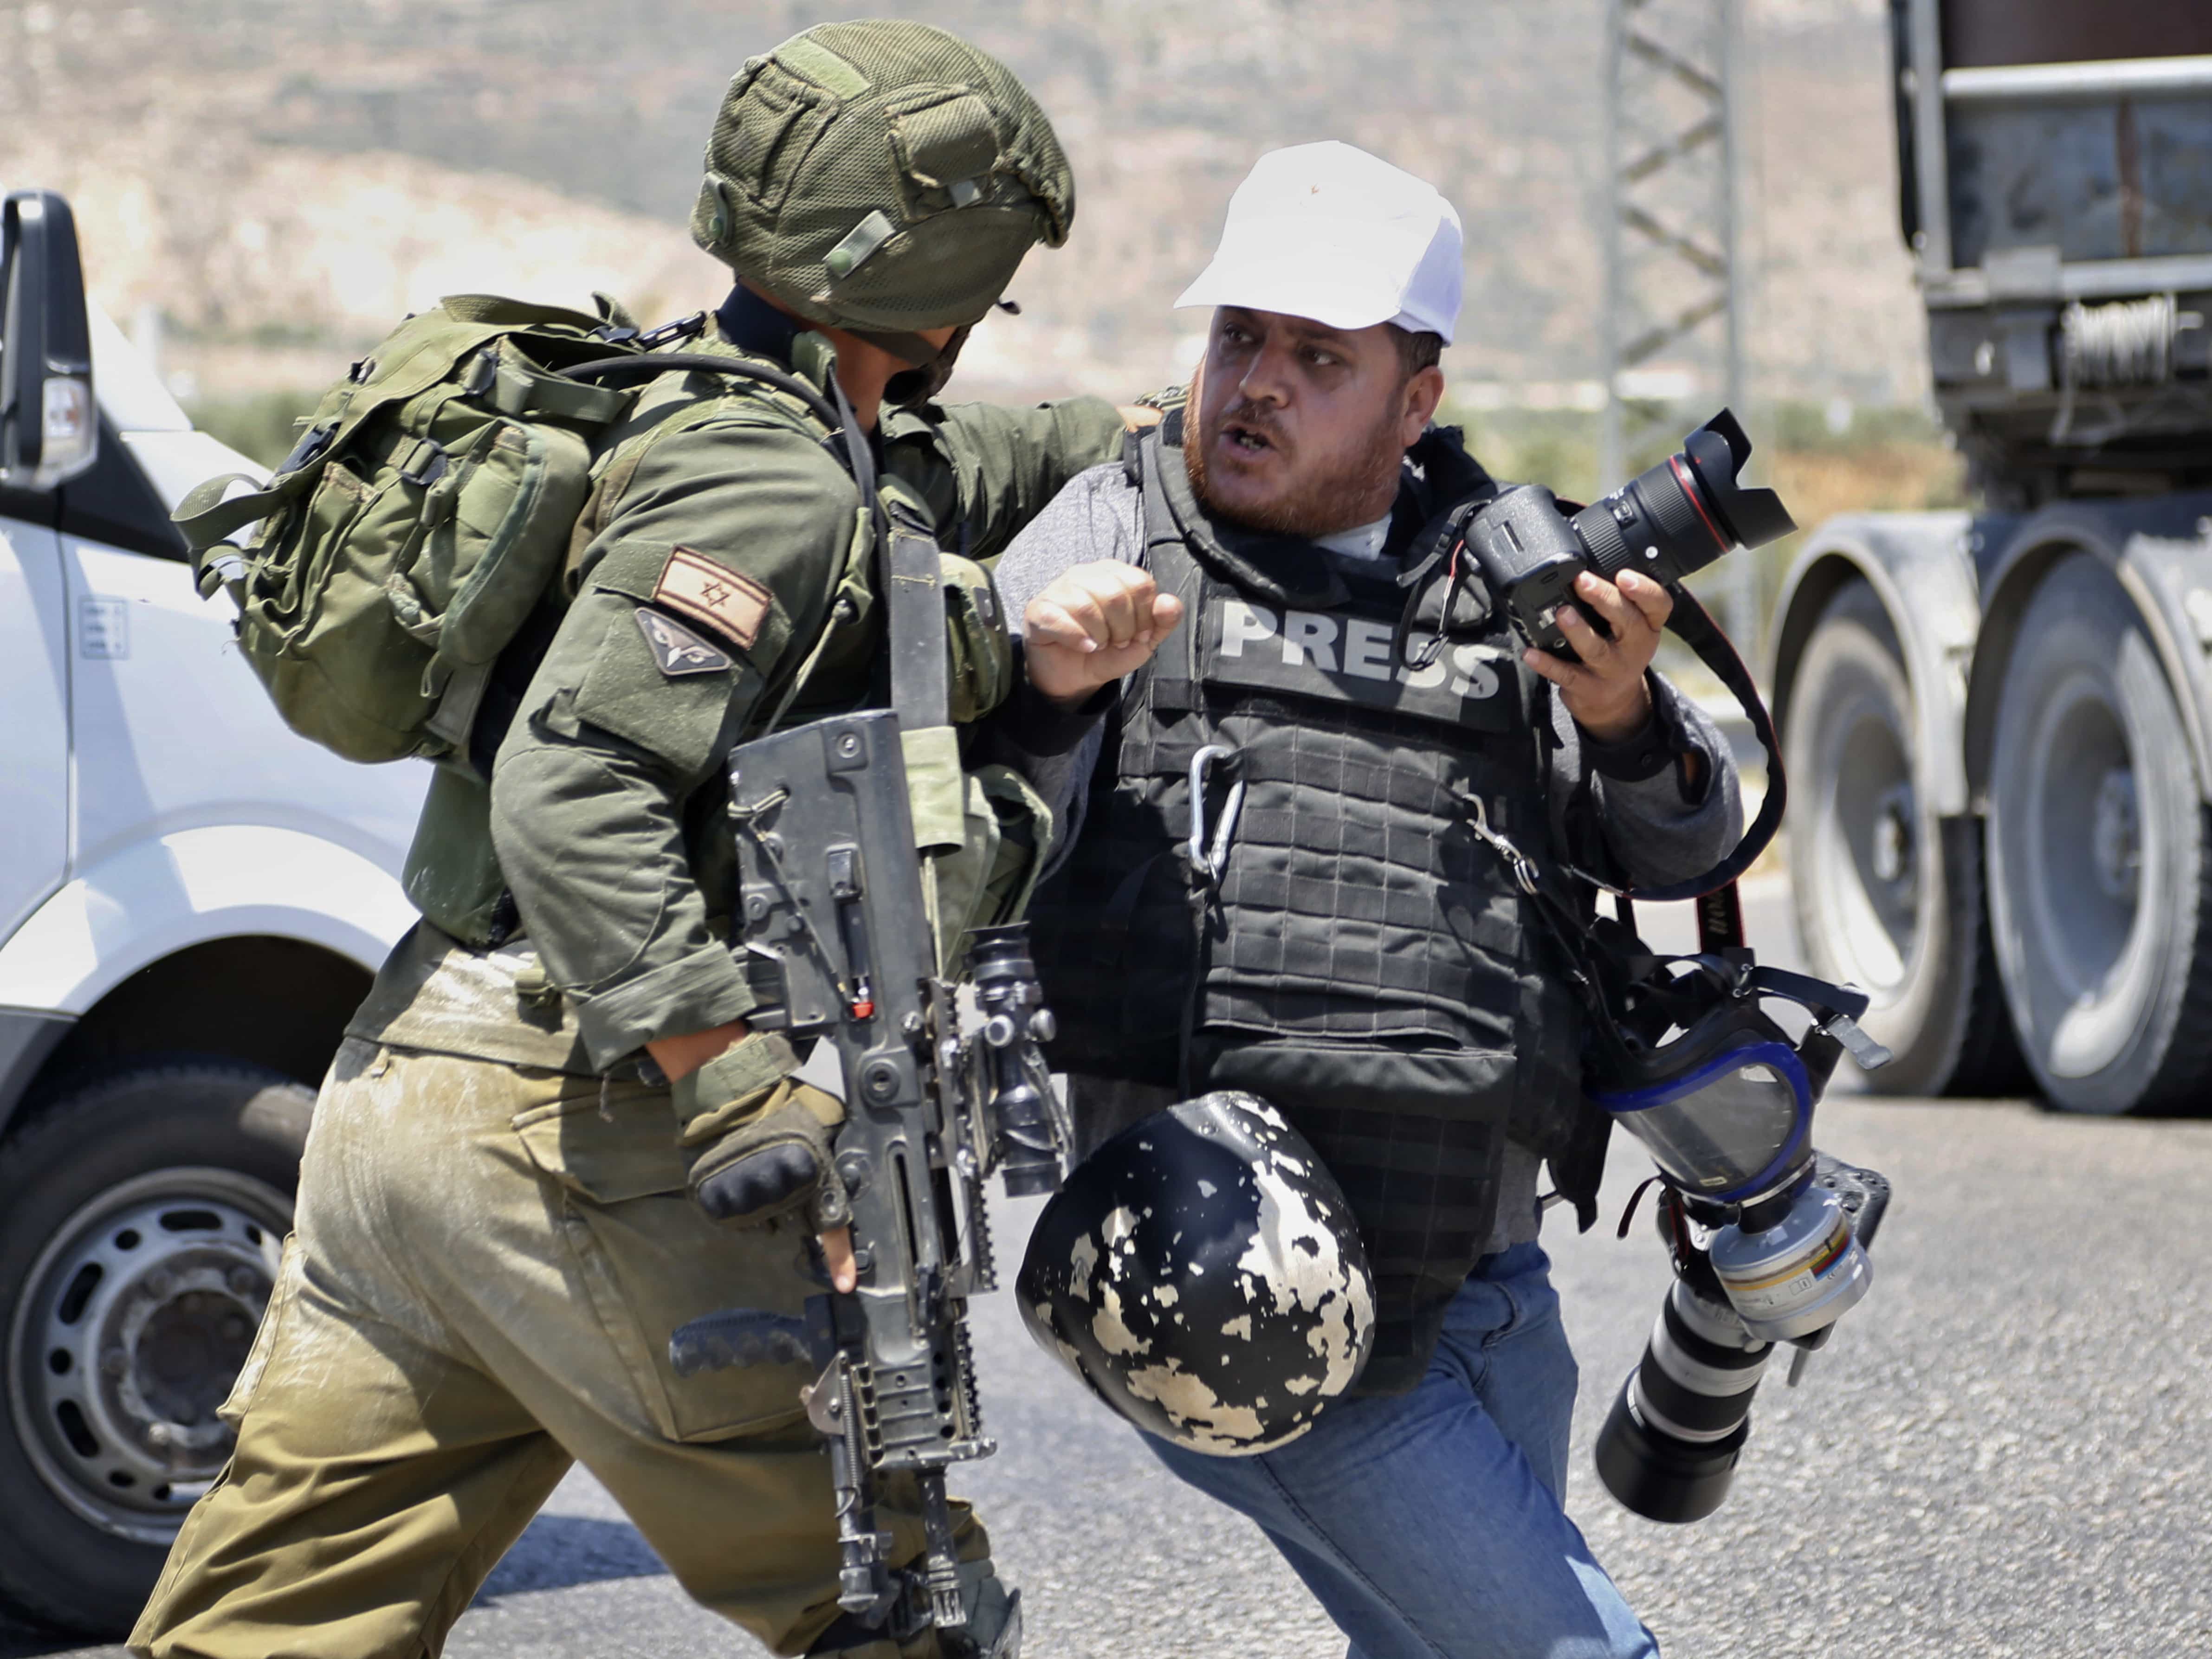 An Israeli soldier pushes a Palestinian photojournalist during a protest in solidarity with Palestinian prisoners on hunger strike in Israeli jails near the settlement of Shavei Shamron close to the West Bank city of Nablus, 16 May 2017, AP Photo/Majdi Mohammed